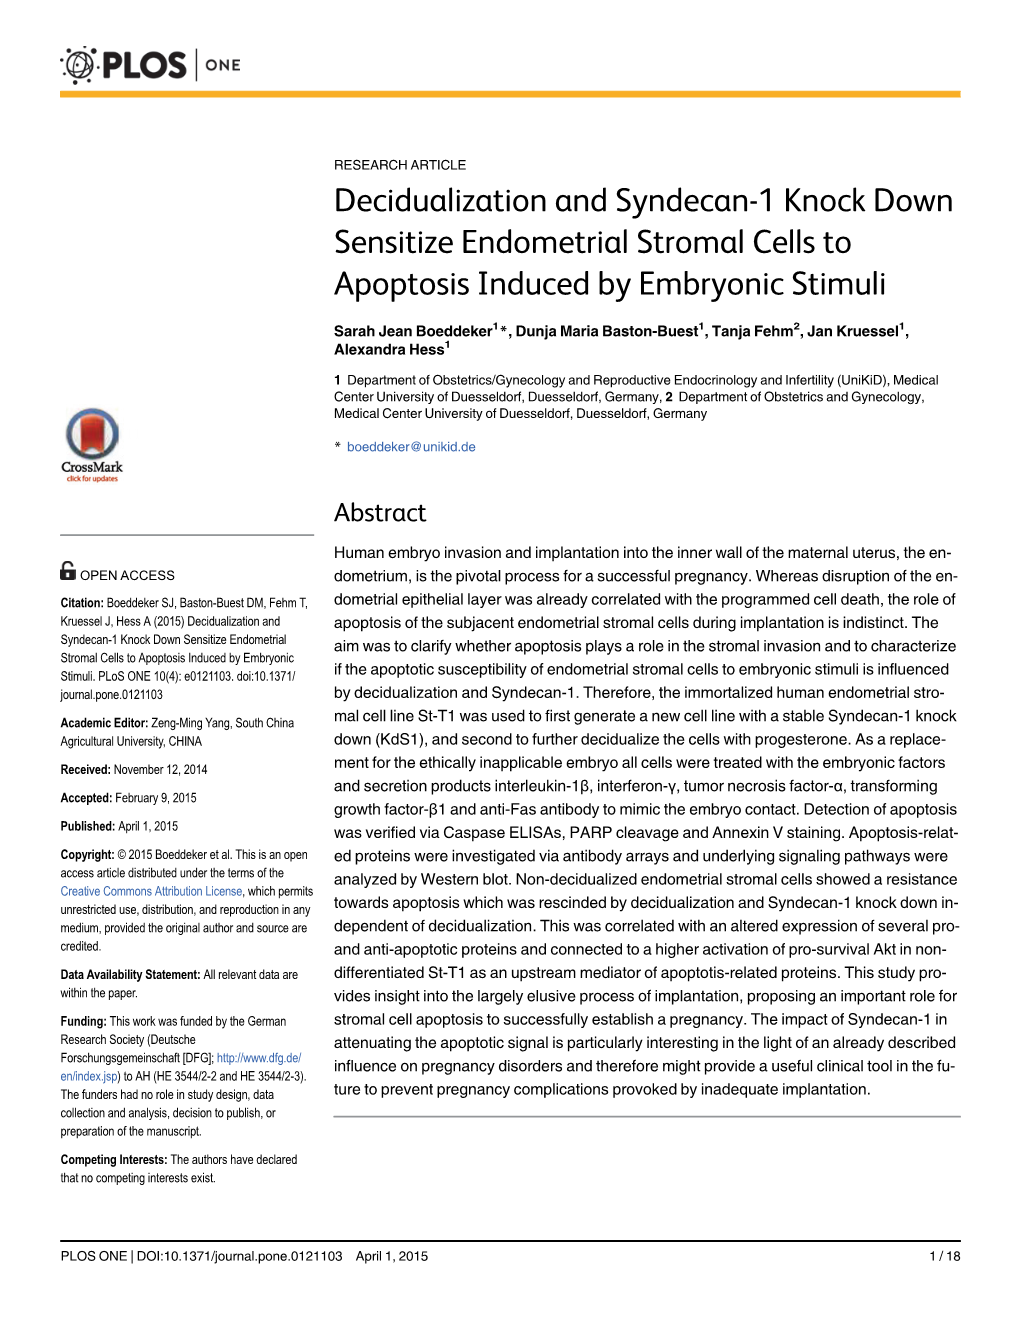 Decidualization and Syndecan-1 Knock Down Sensitize Endometrial Stromal Cells to Apoptosis Induced by Embryonic Stimuli